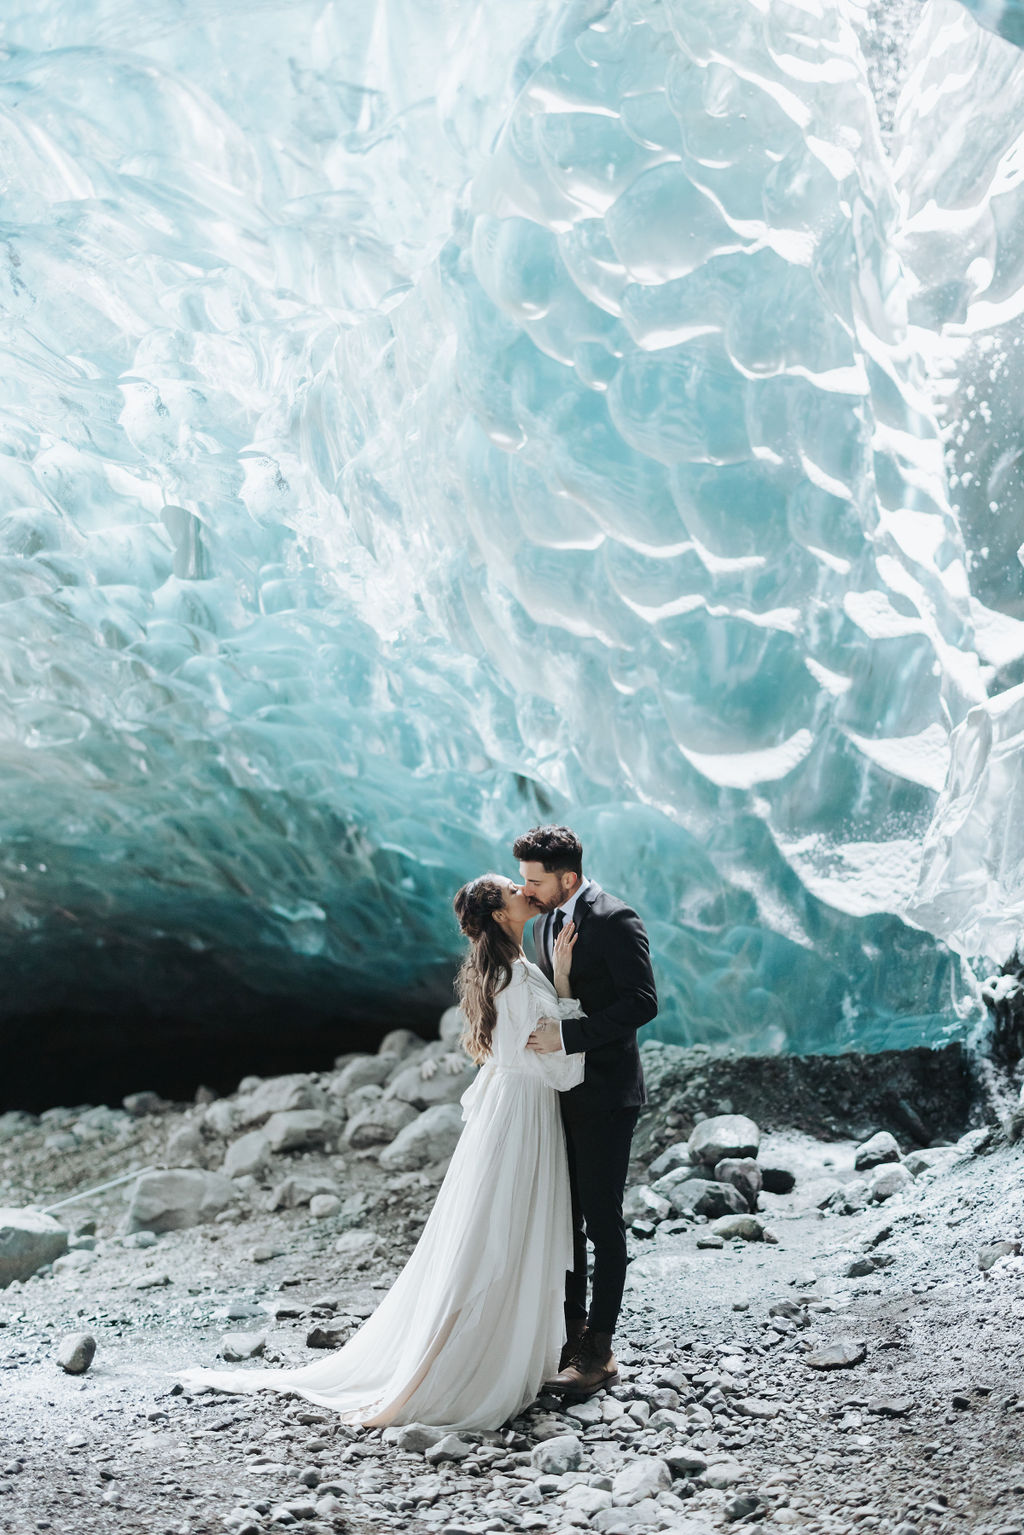 wedding portraits in ice cave with sky